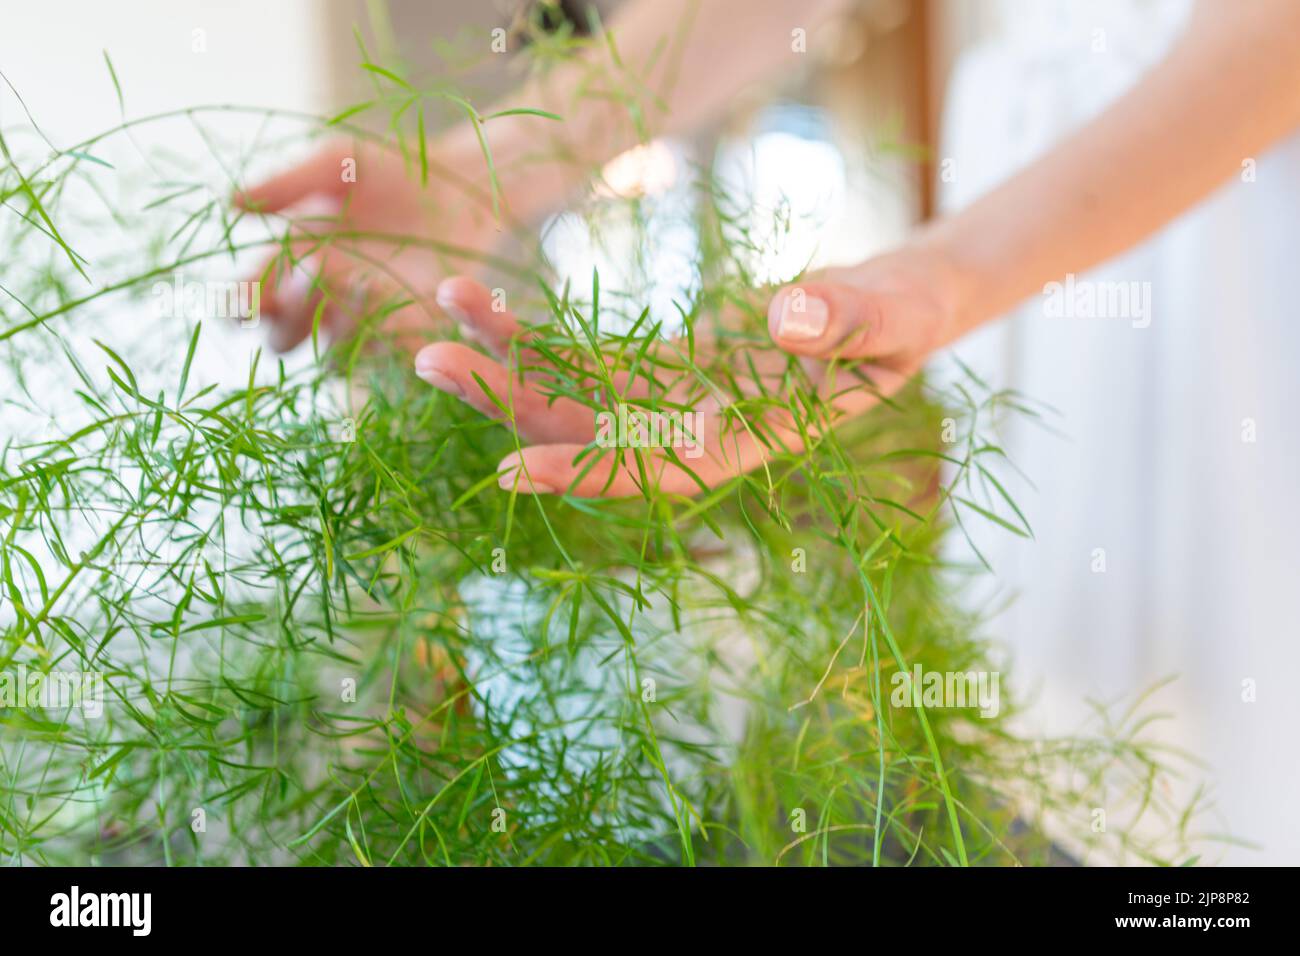 Woman hands touching and caring for the green plant. Stock Photo